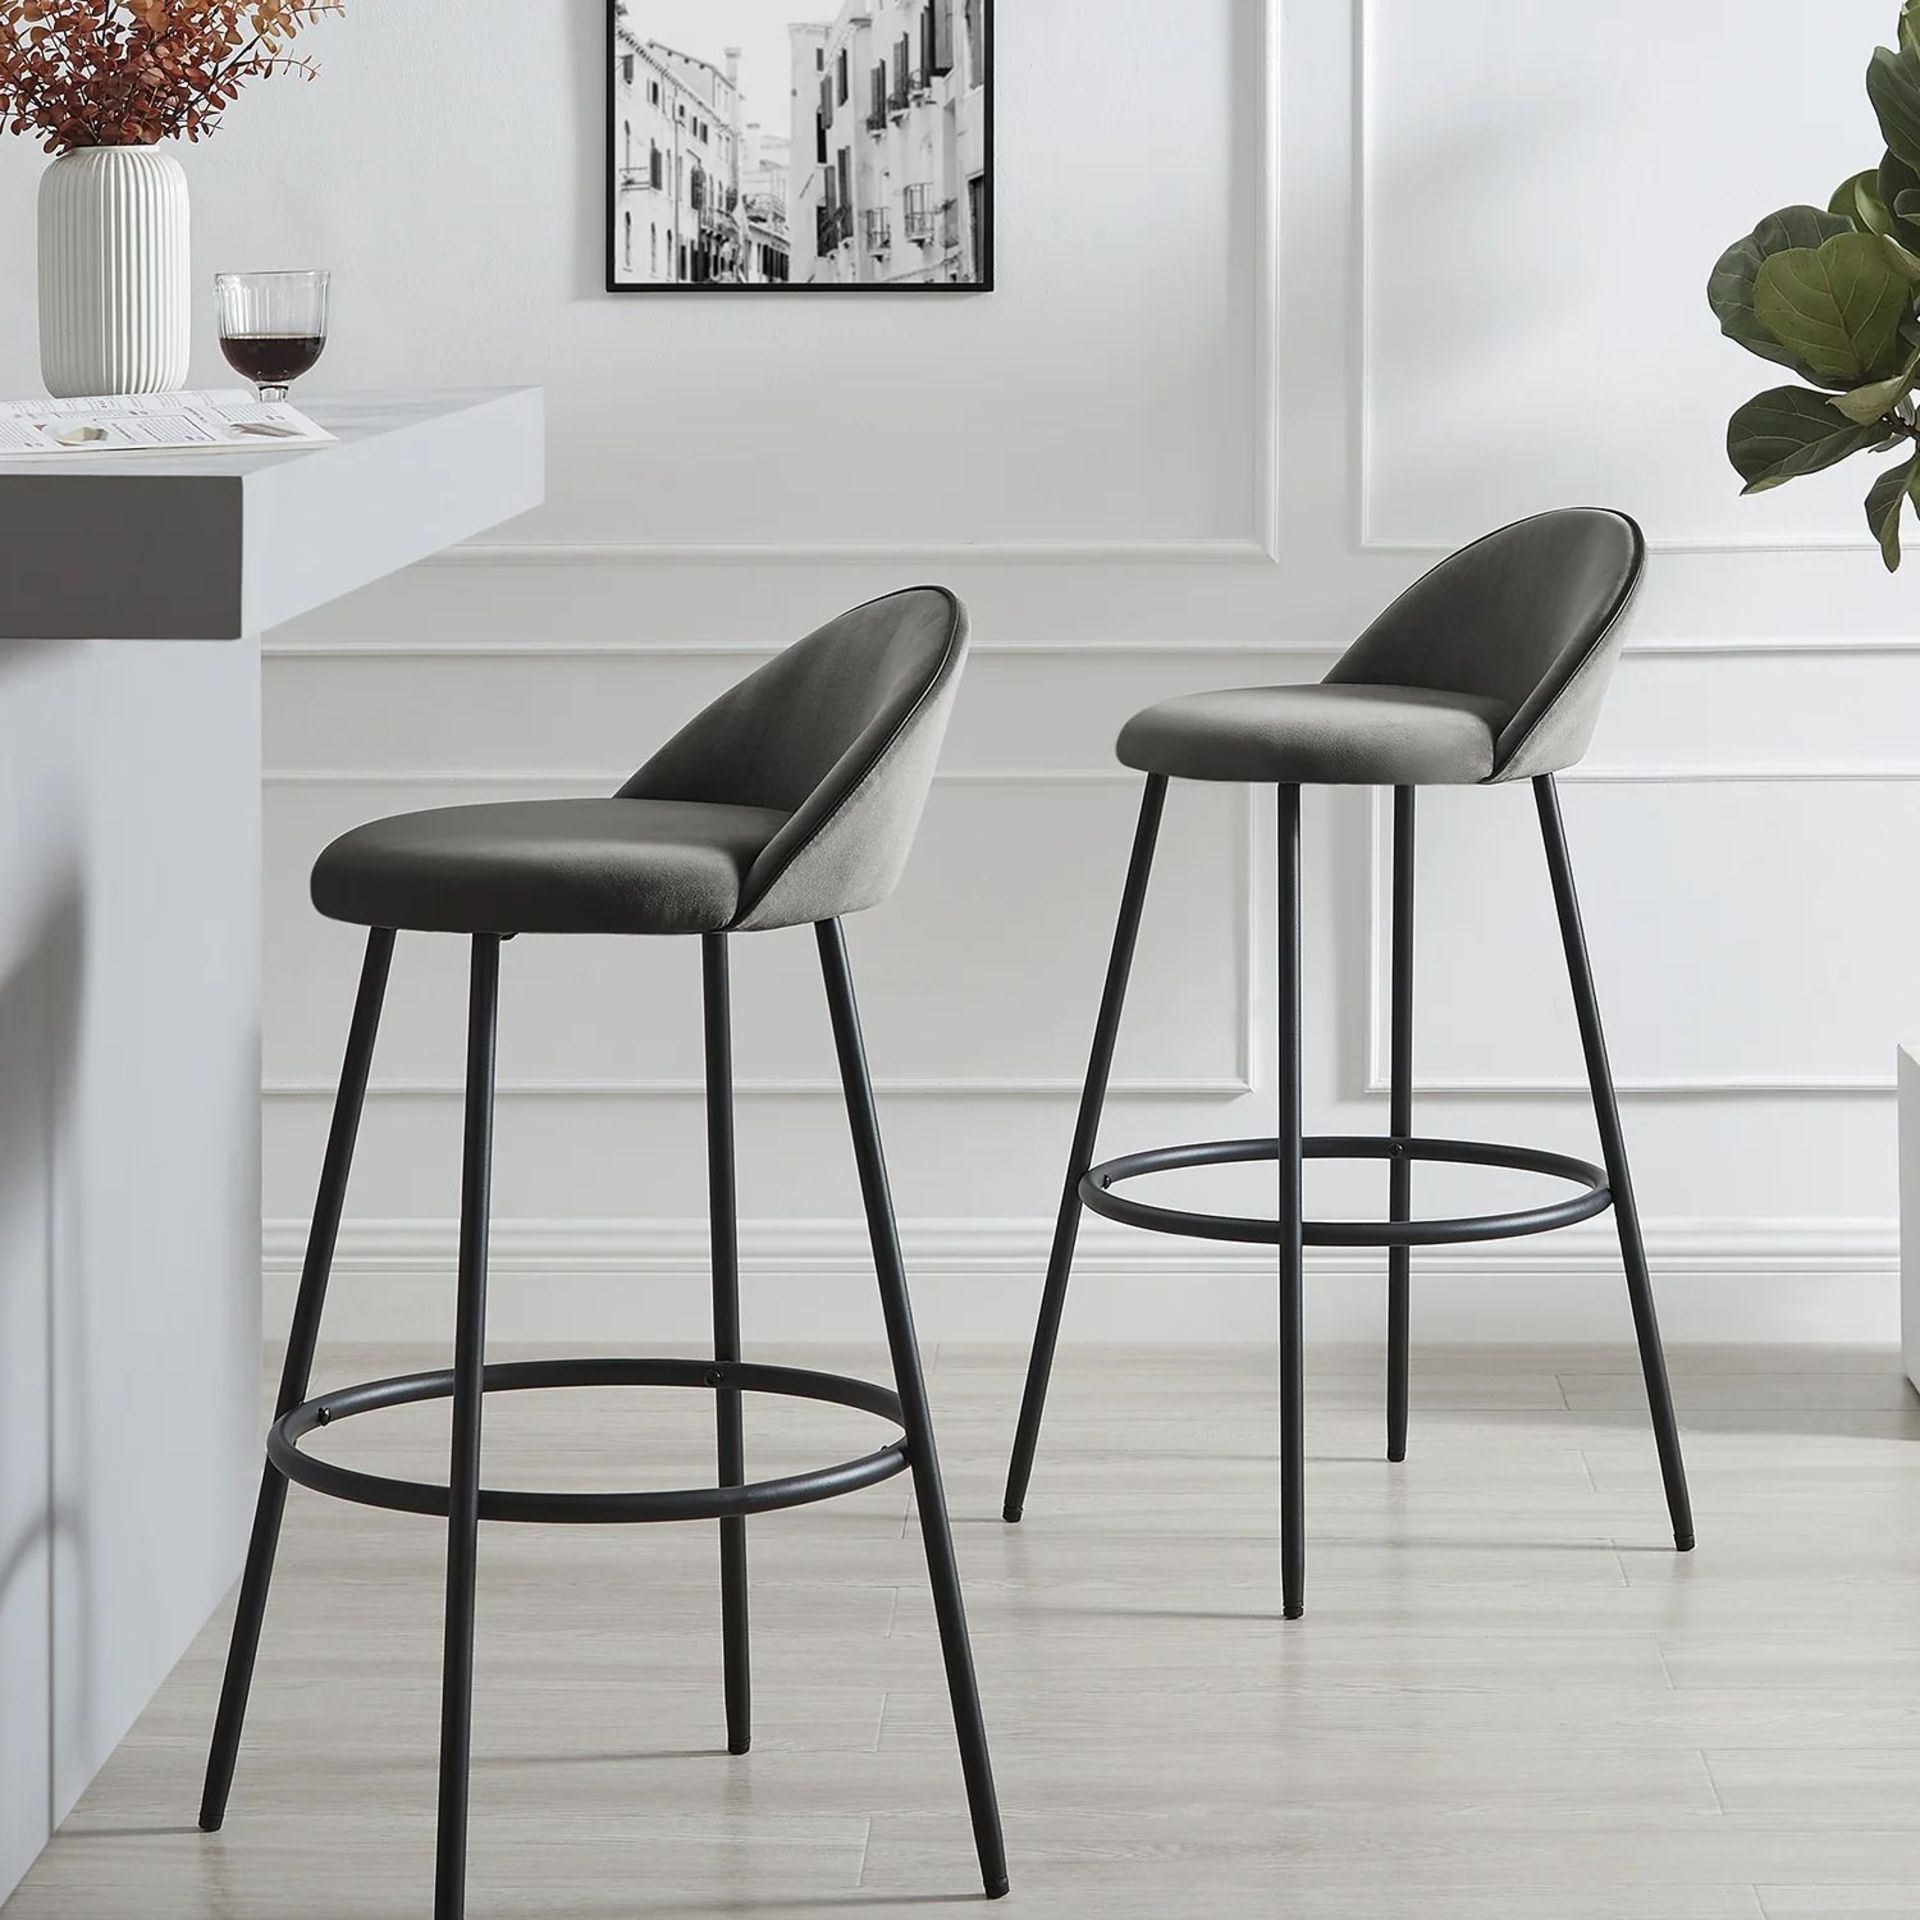 Barton Set of 2 Grey Velvet Upholstered Bar Stools with Contrast Piping. - R14. RRP £199.99. Our